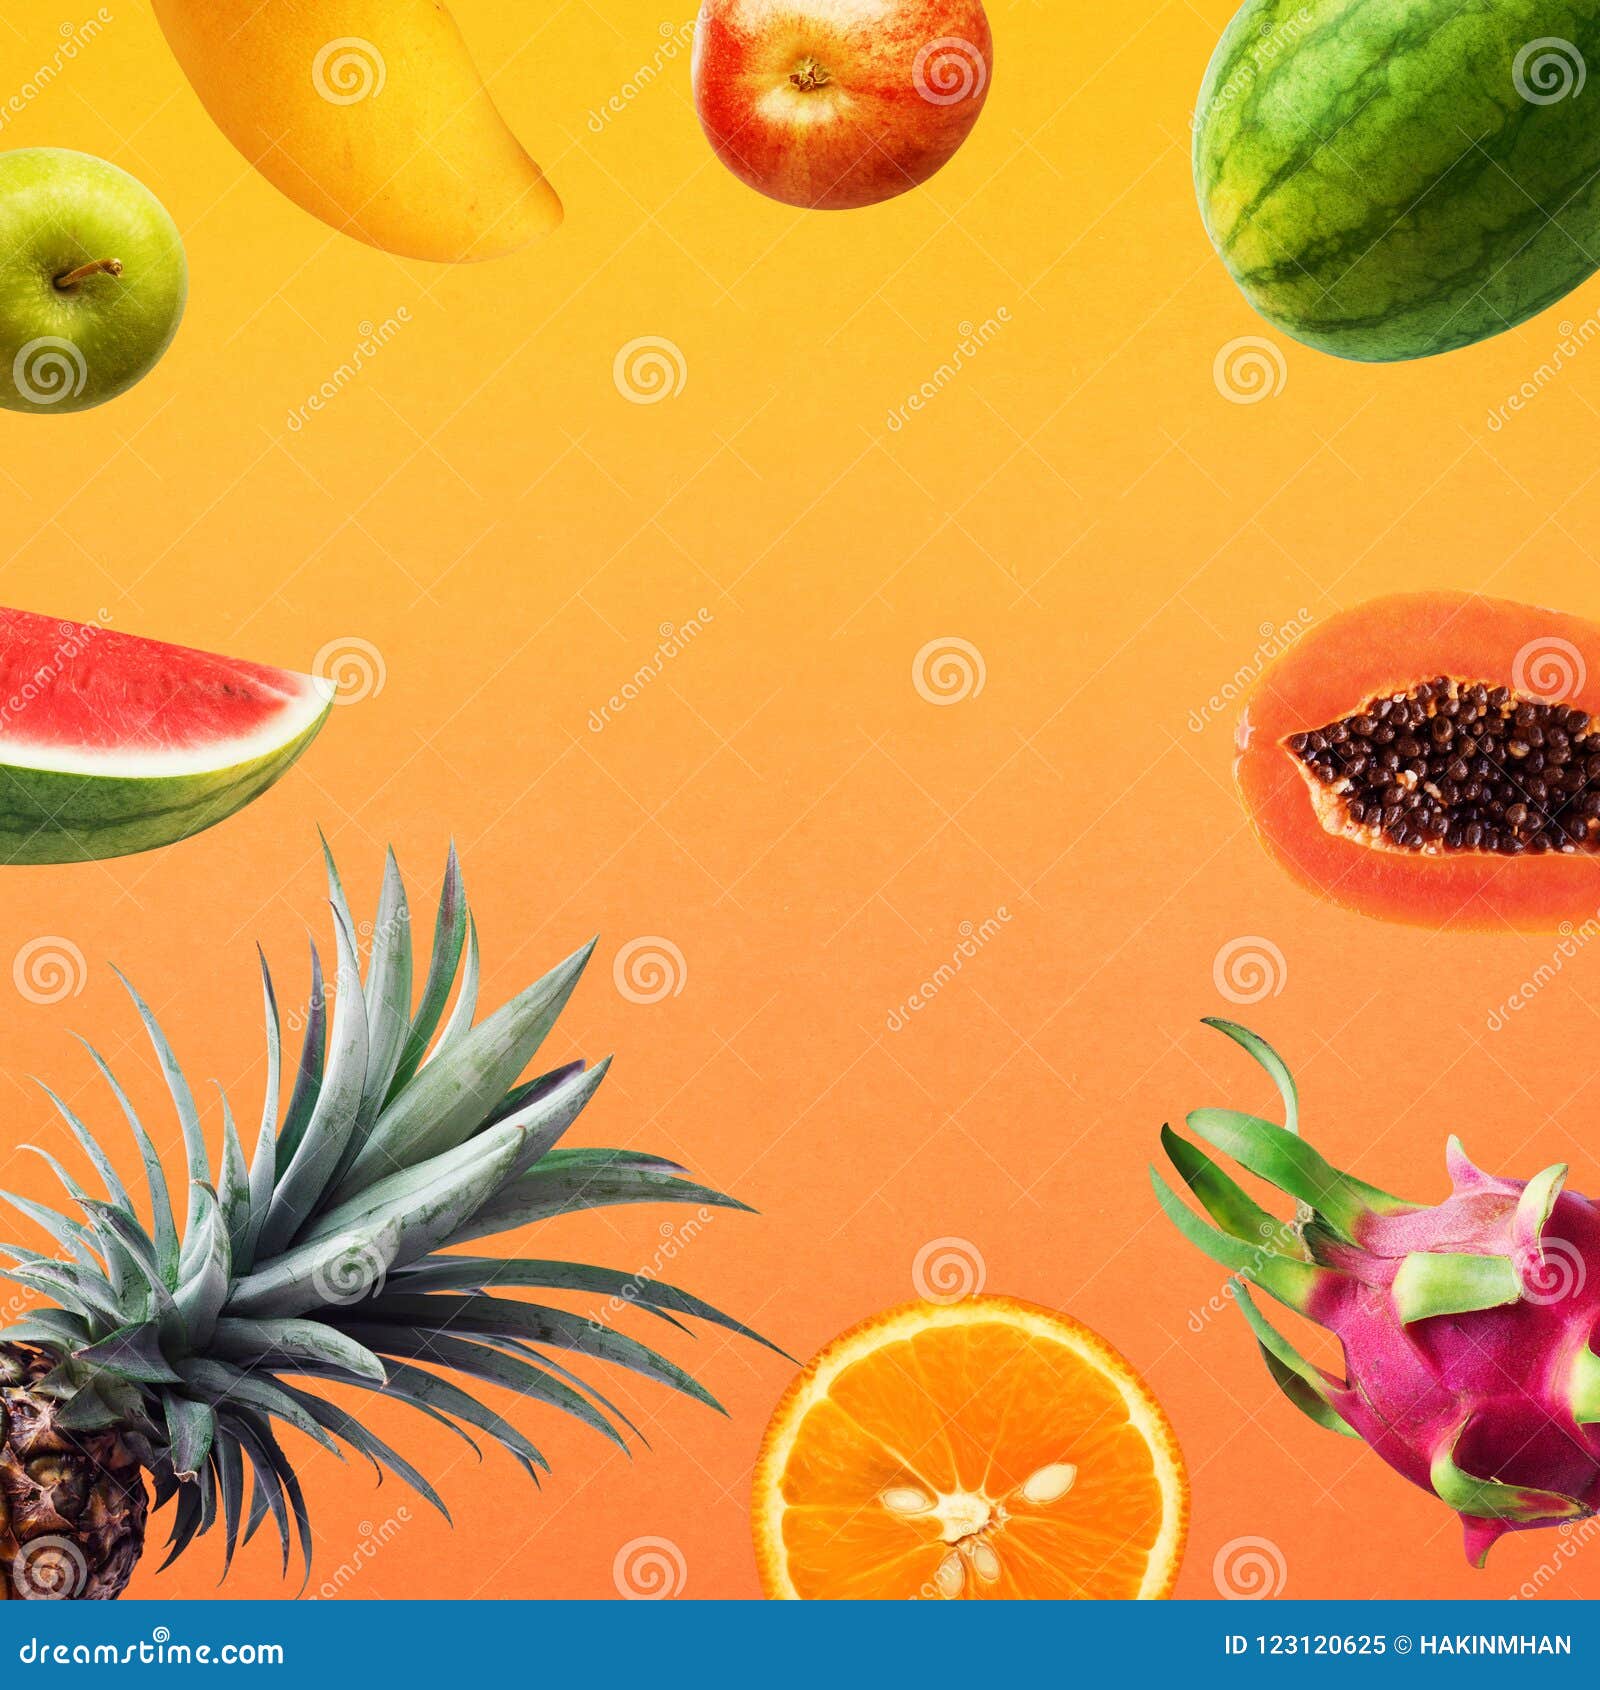 set of fruits on olor background.holiday summer .healthy eating